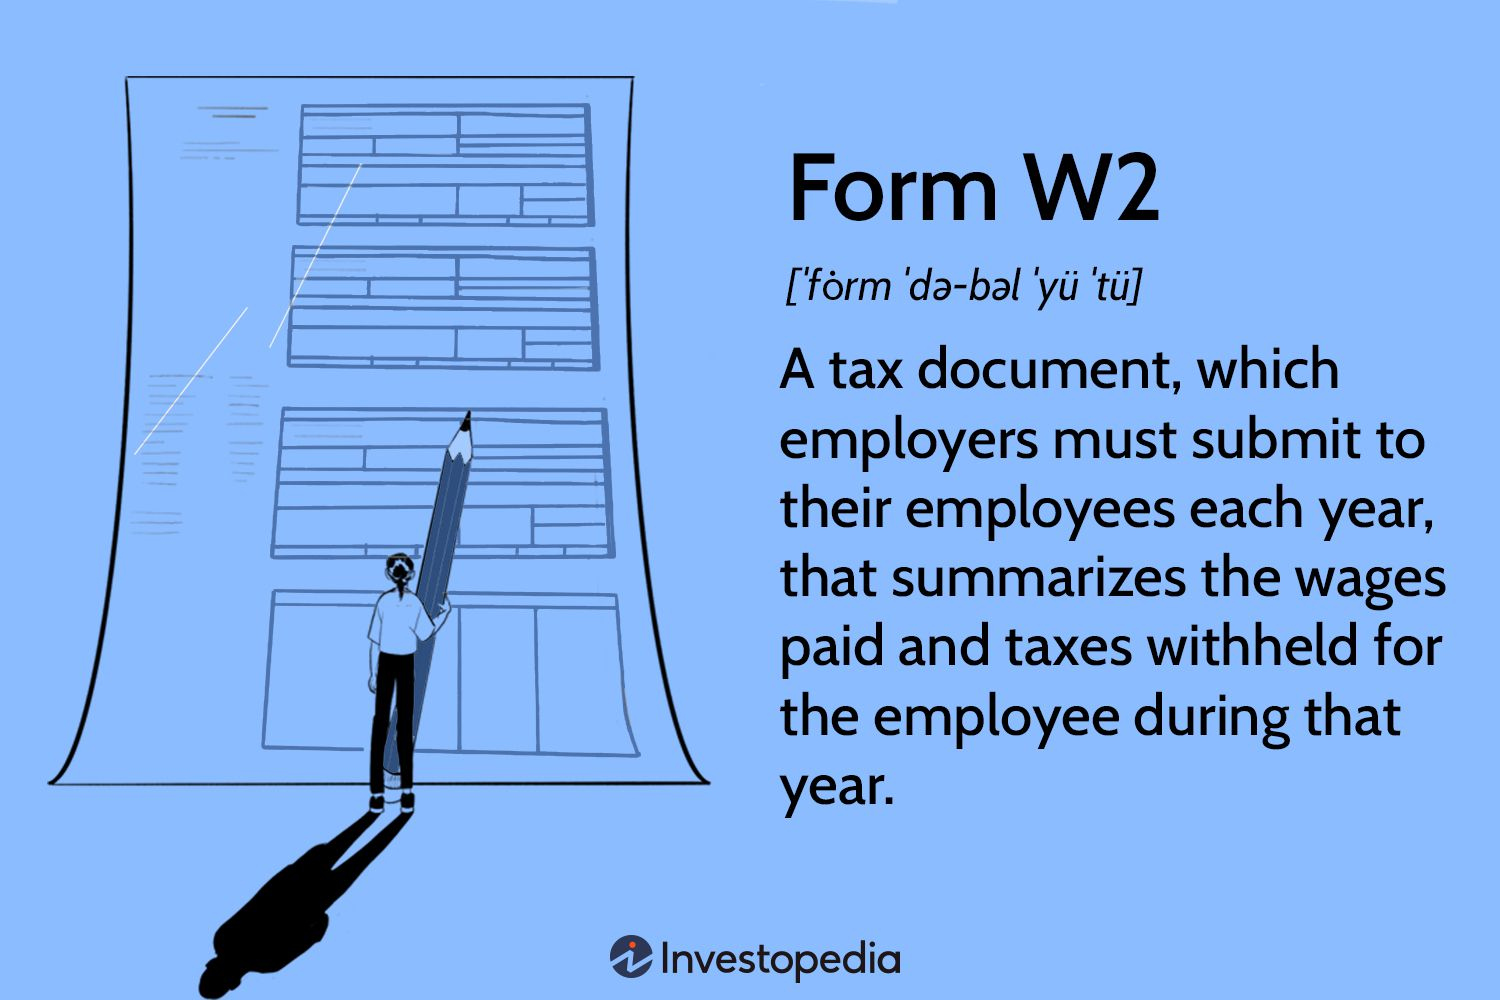 Form W-2 Wage And Tax Statement: What It Is And How To Read It regarding W2 Form When Do I Get It